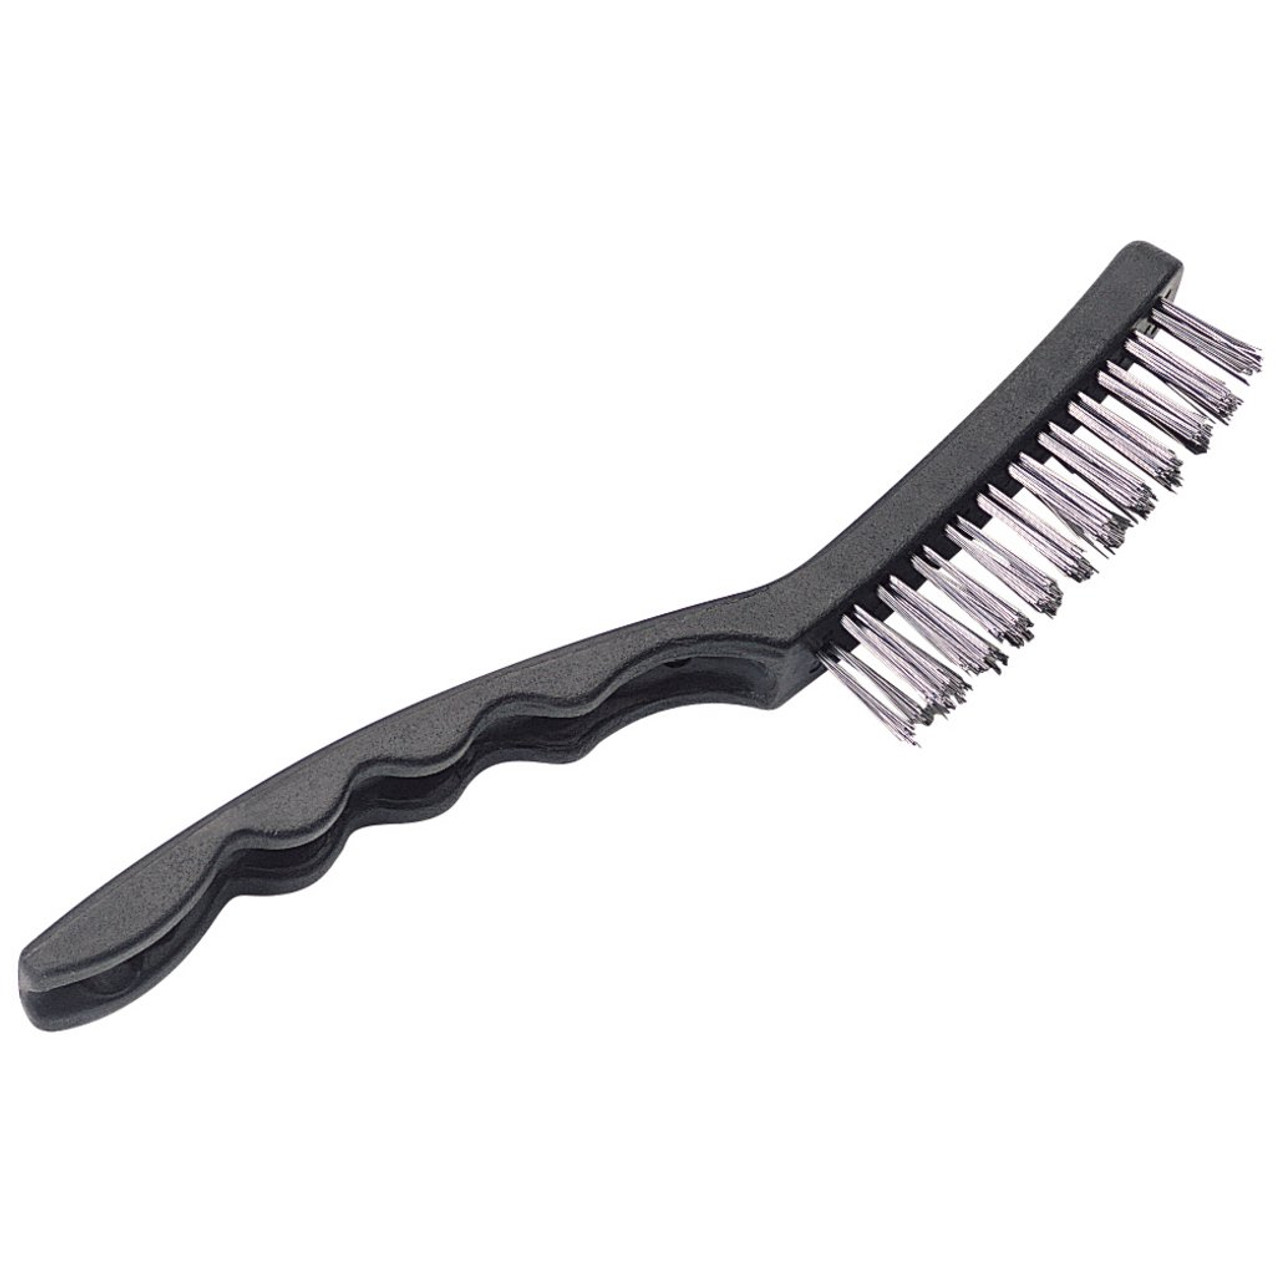 K-T Industries 5-2203 Small Plastic Brush Stainless Steel